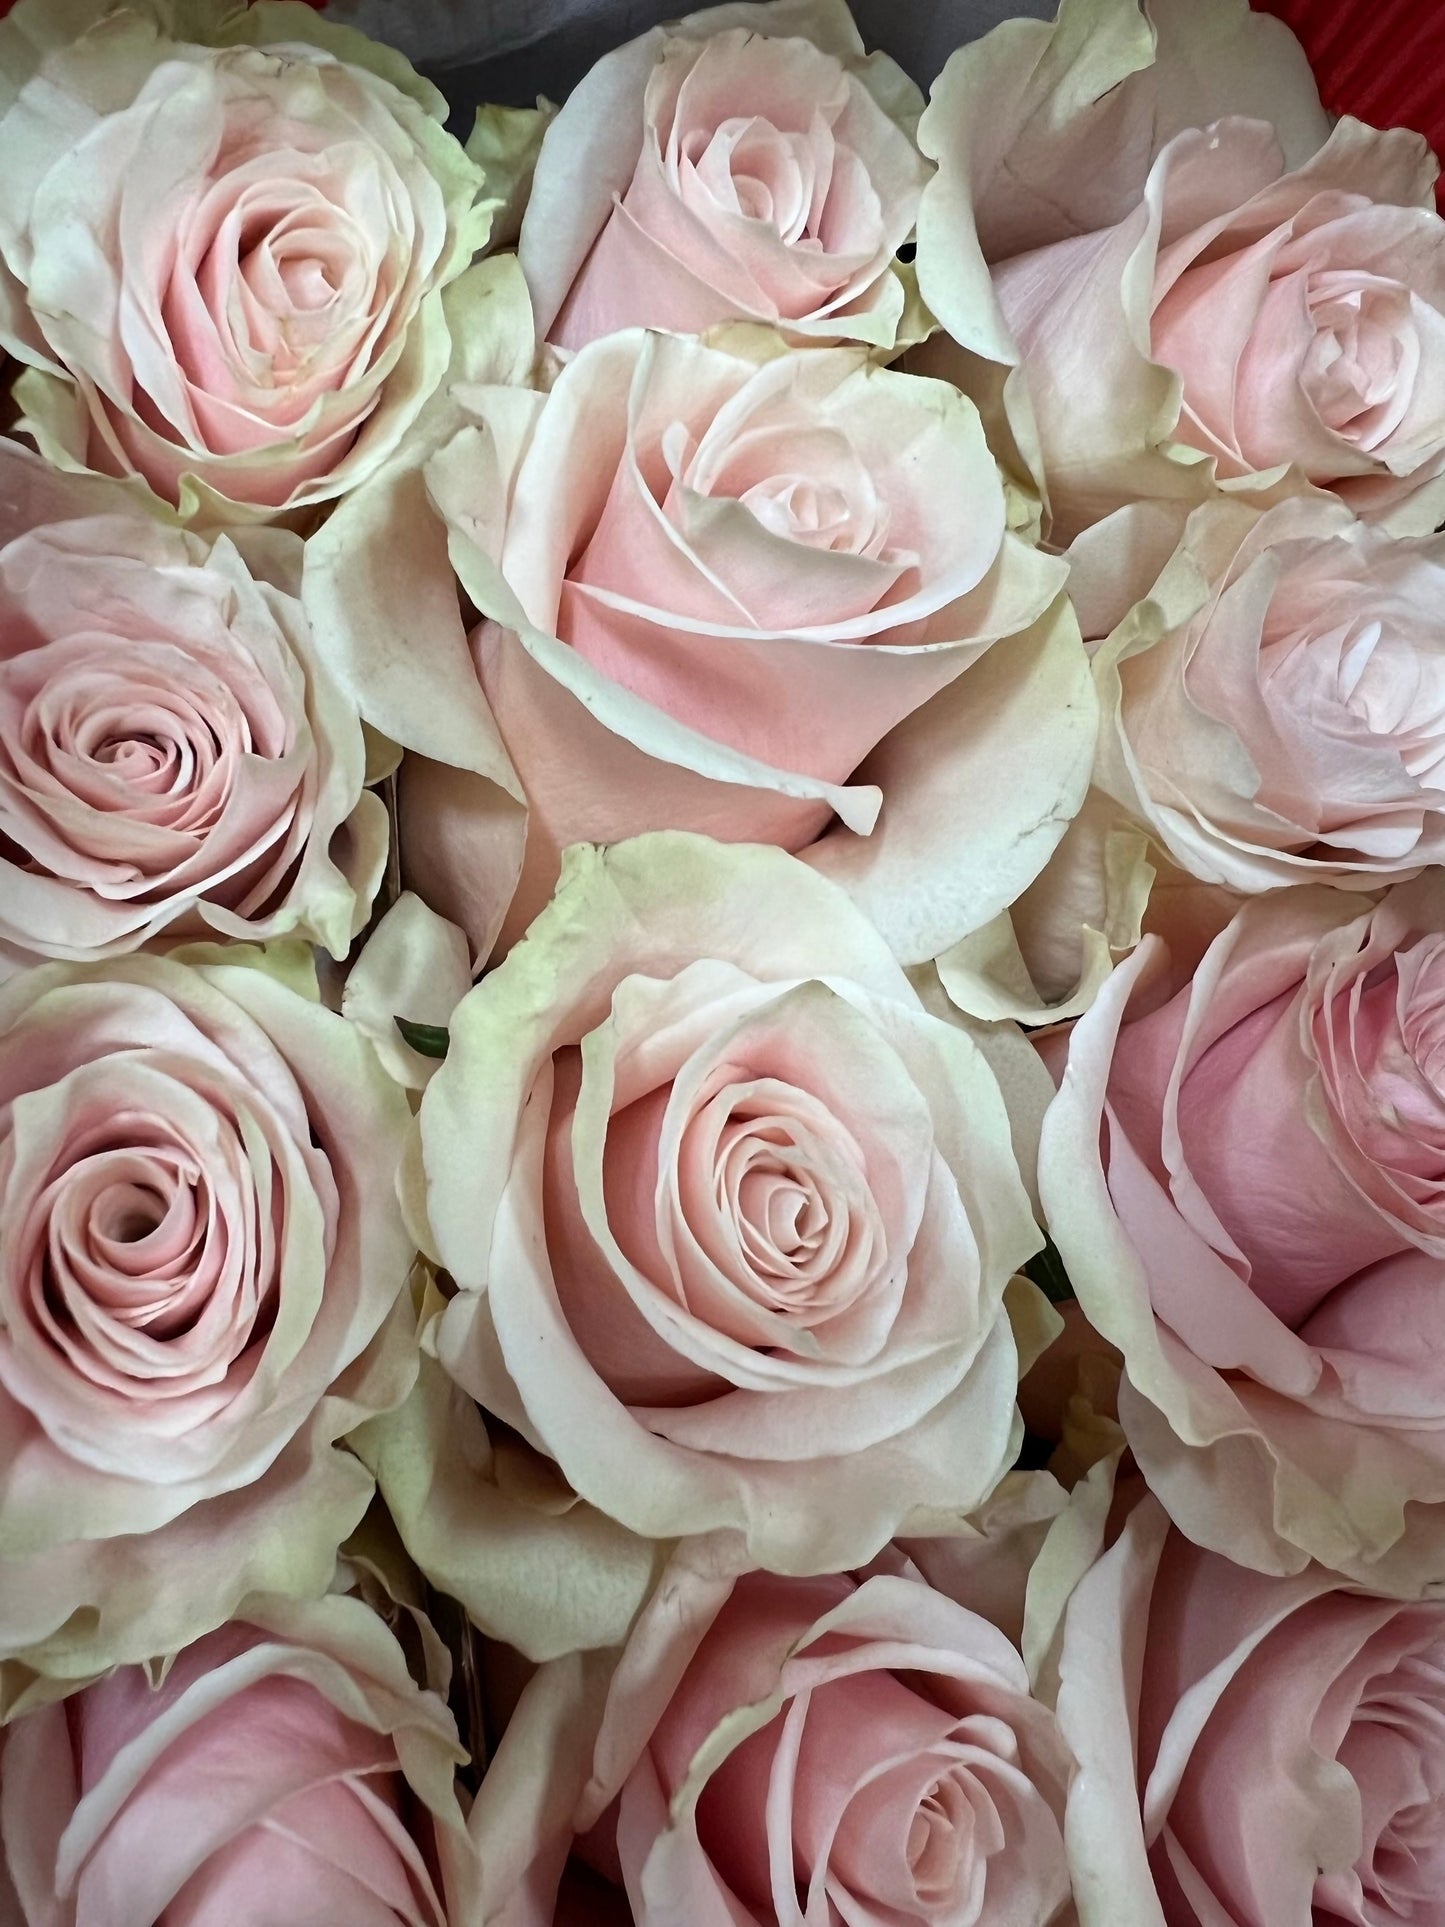 Detail of the Love Story product with pink and white roses presented in a box